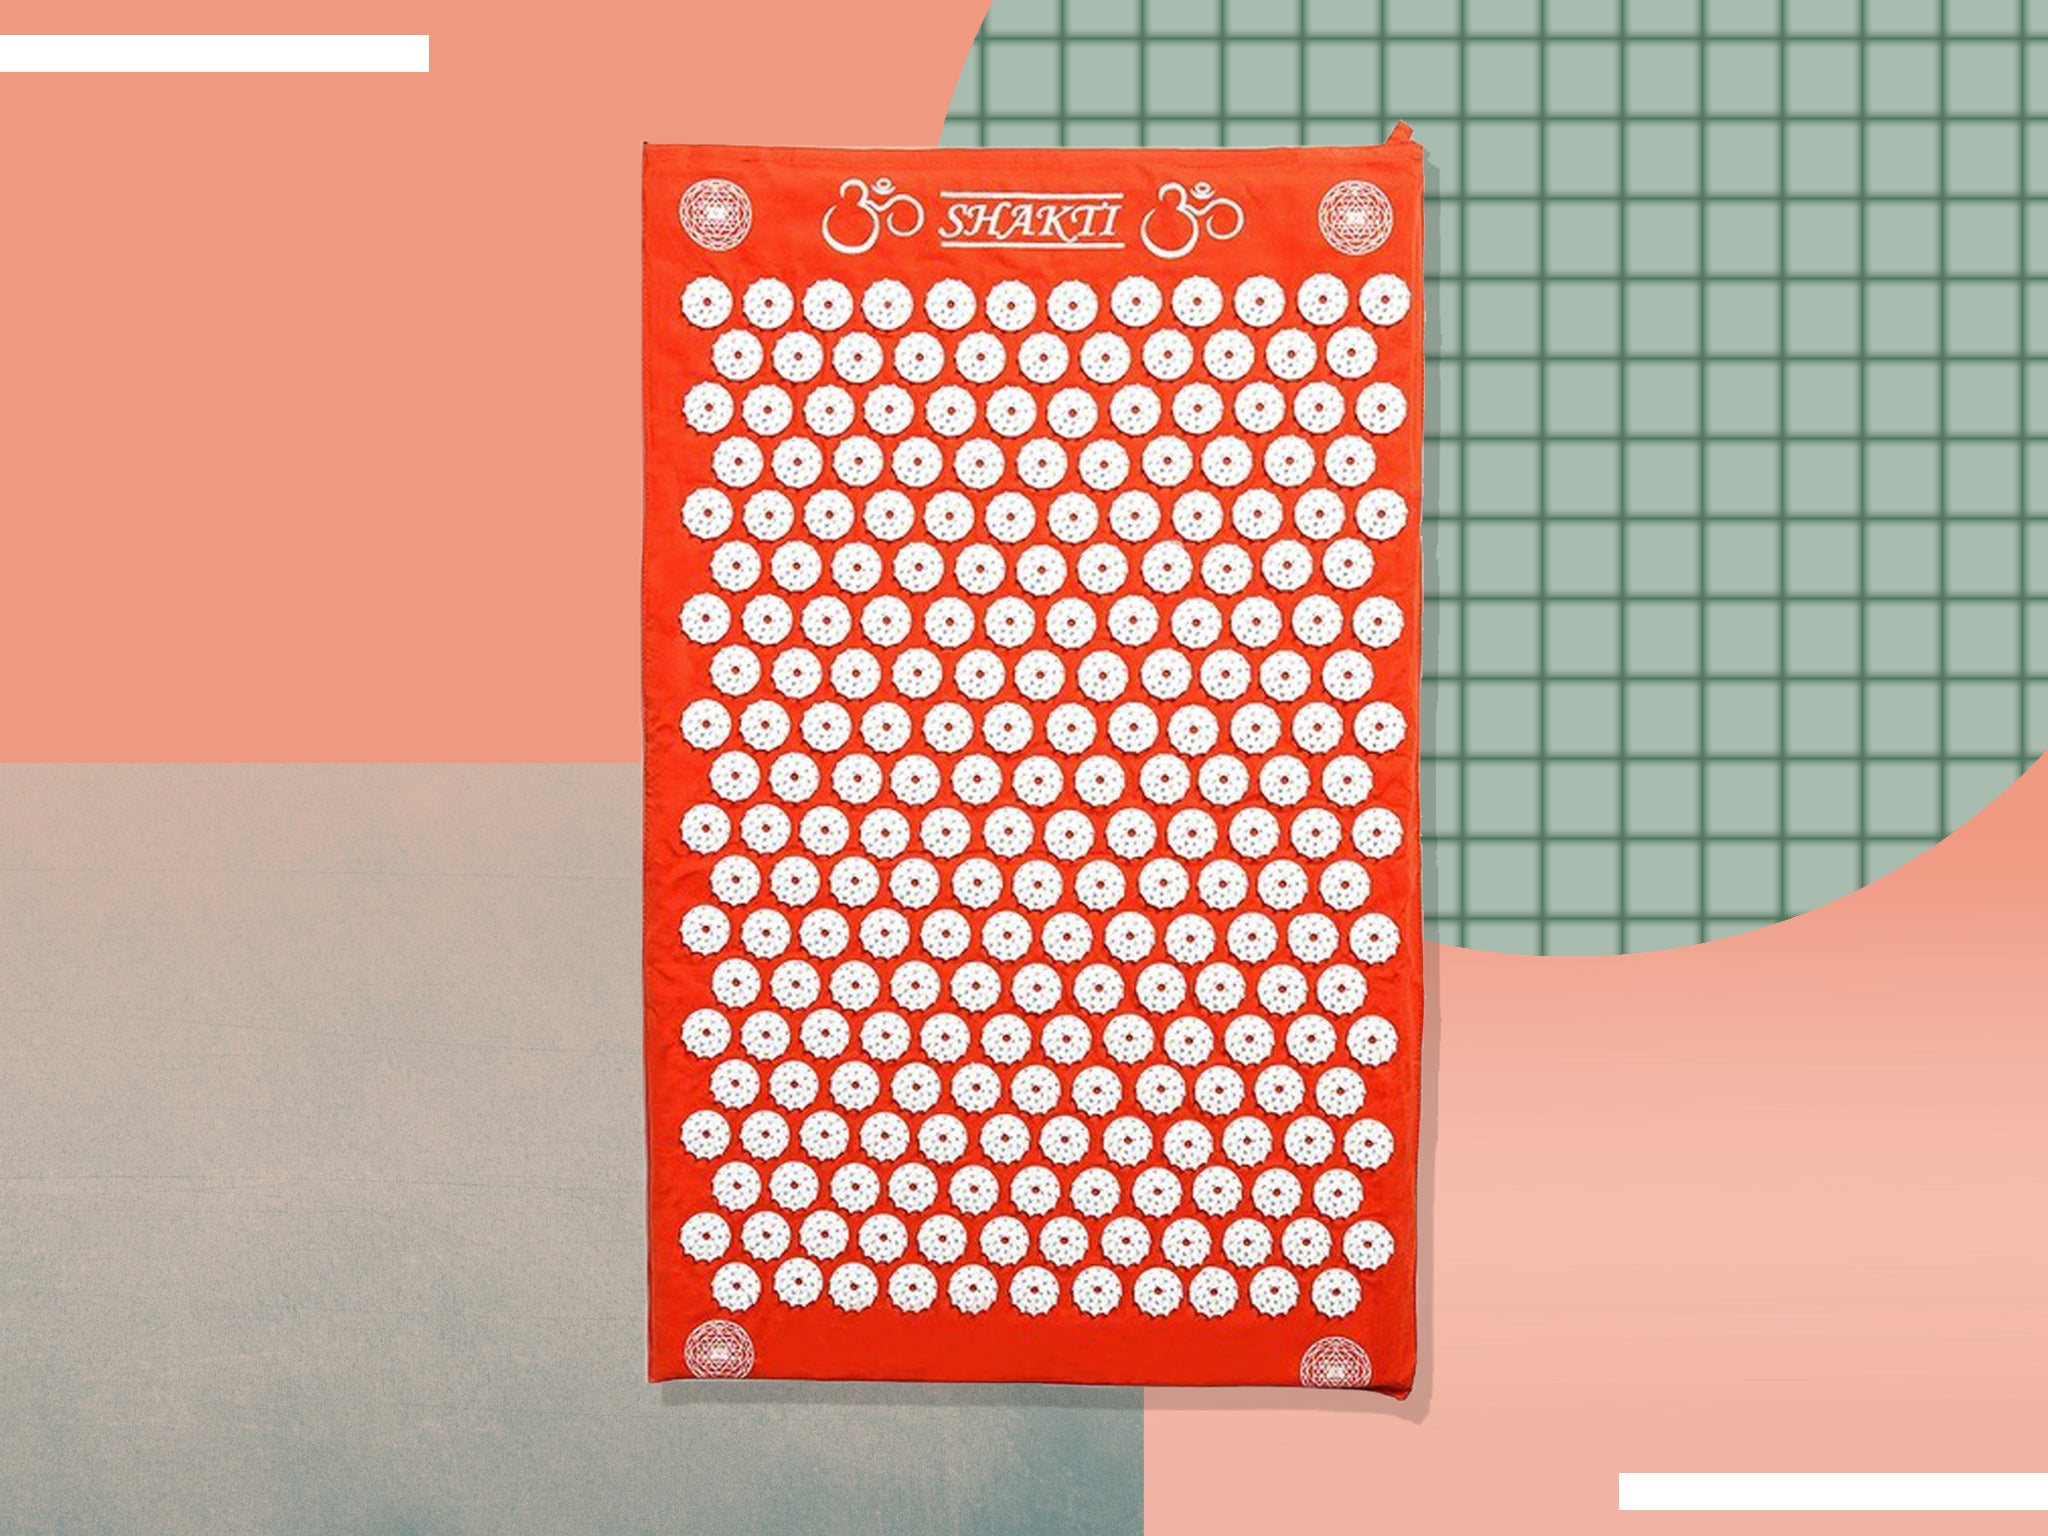 The acupressure mat boasts 6000 spikes, but feels far more satisfying than it sounds